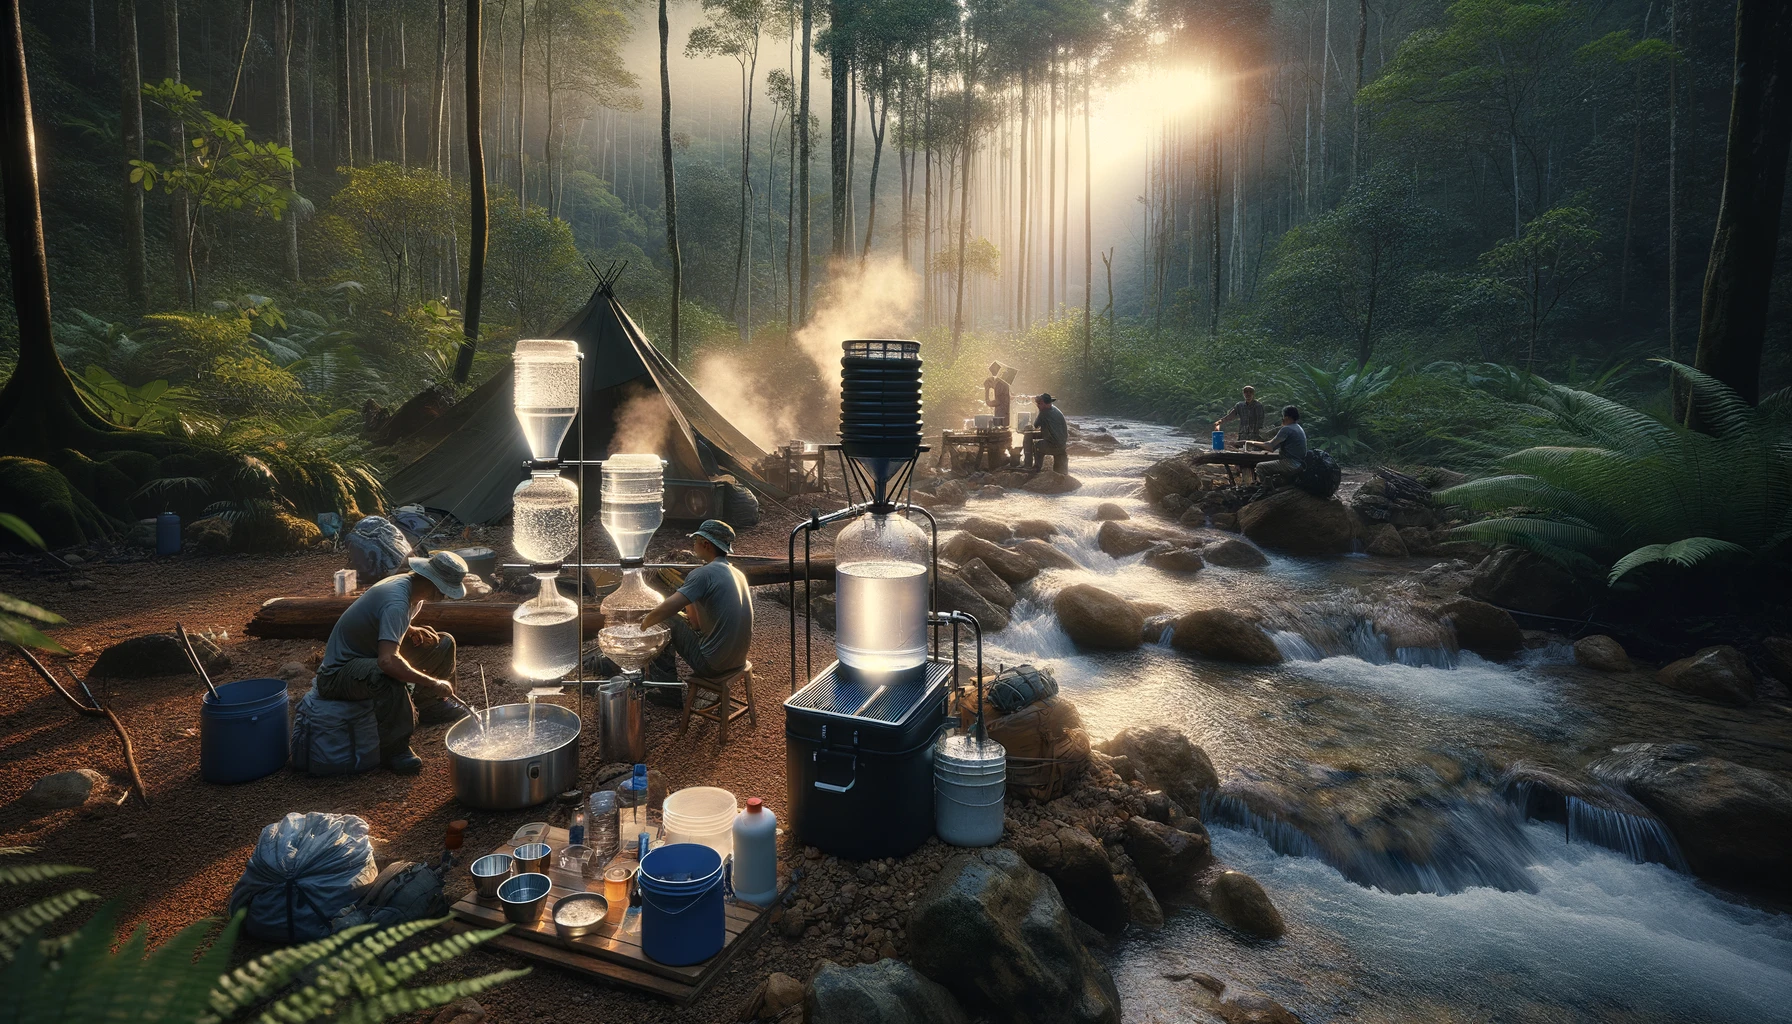 Advanced survival cooking with limited resources by a crystal-clear stream, featuring a solar still for water distillation, solar water heating for sterilization, and a gravity-fed water filtration system, set in a vibrant forest at dawn highlighting resourcefulness